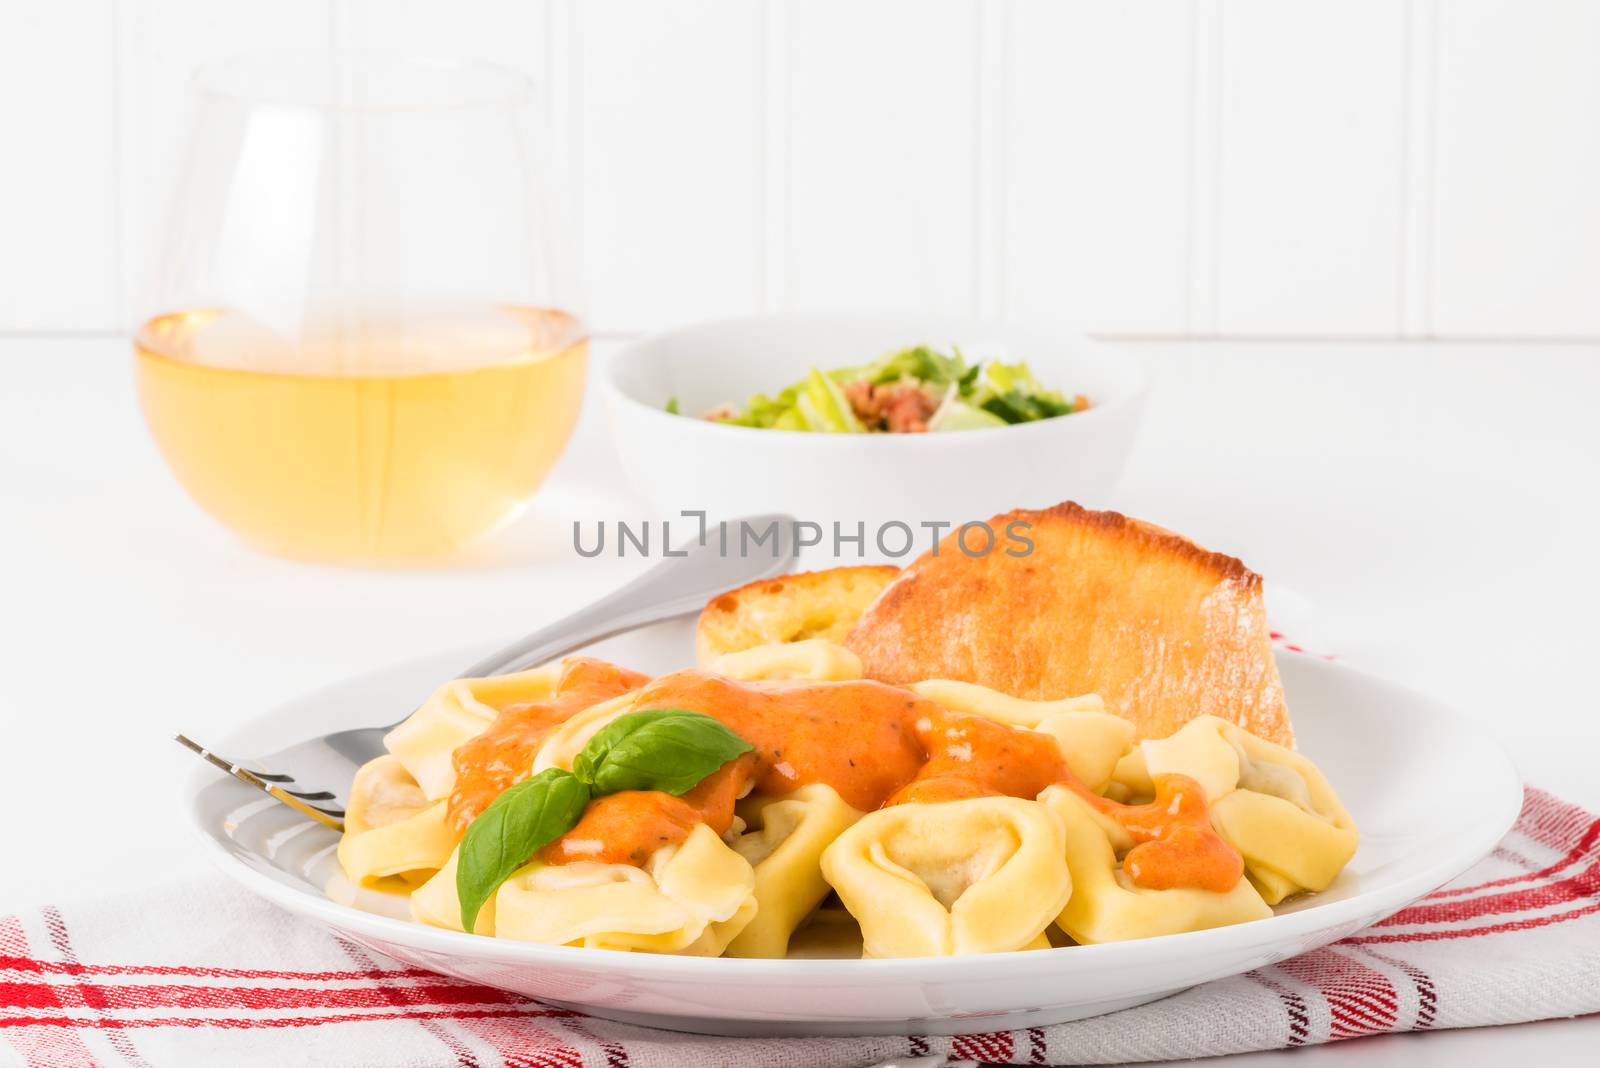 Tortelloni with caesar salad and white wine.  Useful for menus and other food service applications.